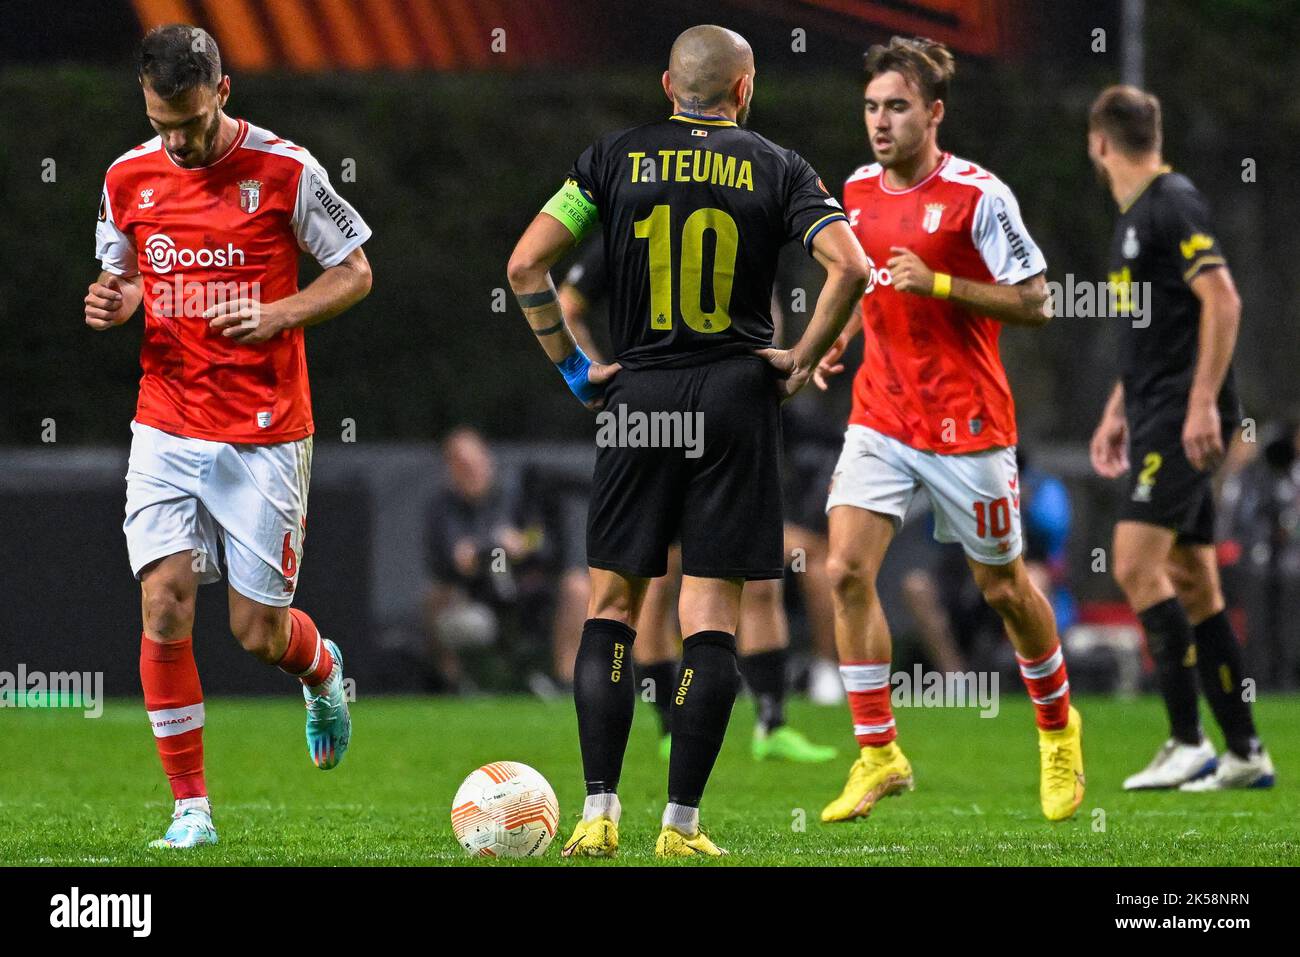 Braga, Portugal, 06/10/2022, Union's Teddy Teuma looks dejected during a  match between the Portugese club SC Braga and Belgian soccer team Royale Union  Saint-Gilloise, Thursday 06 October 2022 in Braga, Portugal, the